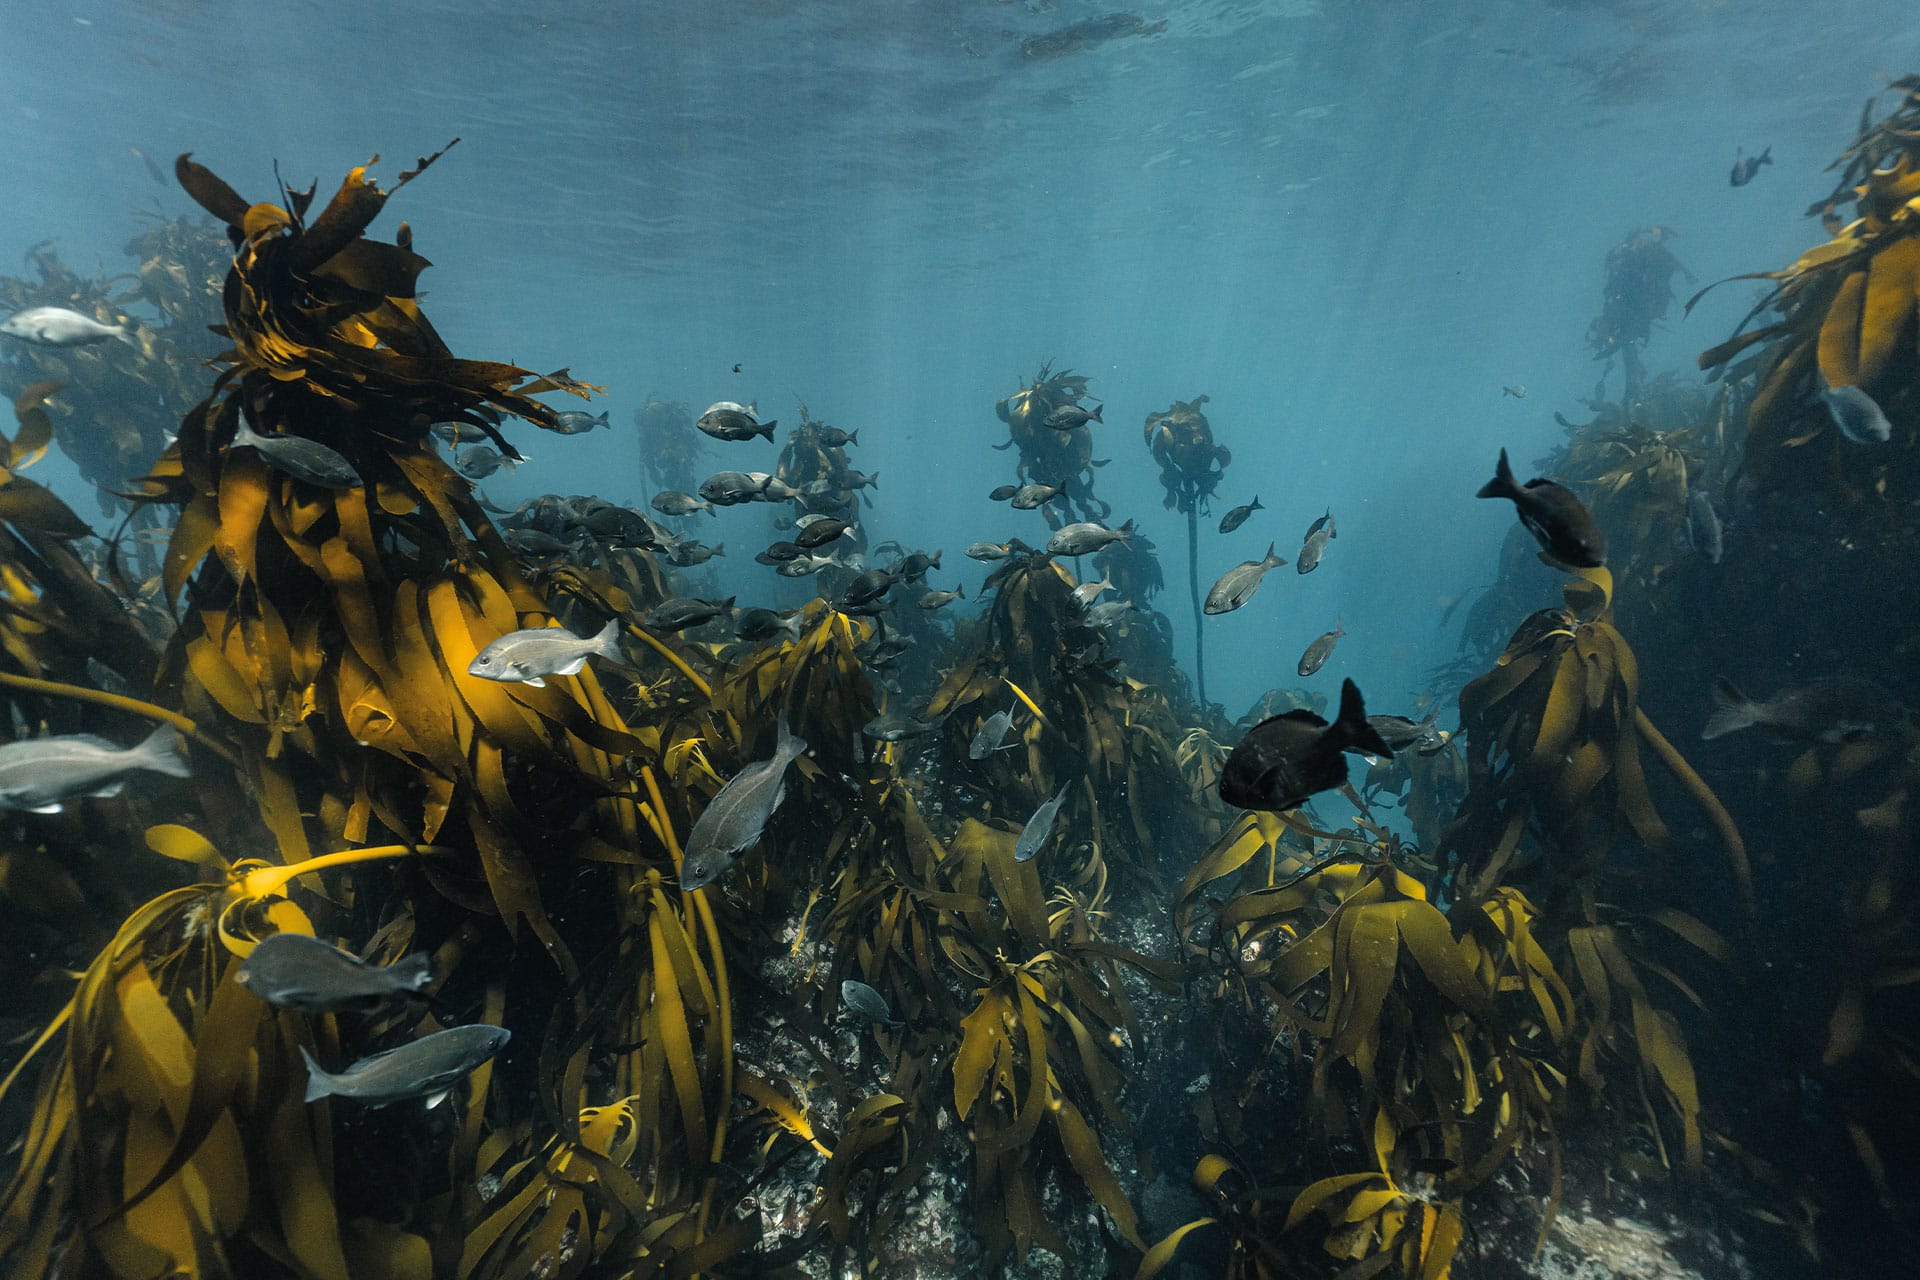 Cape kelp forests on a Marine Biologist for a day experience with Belmond Mount Nelson.